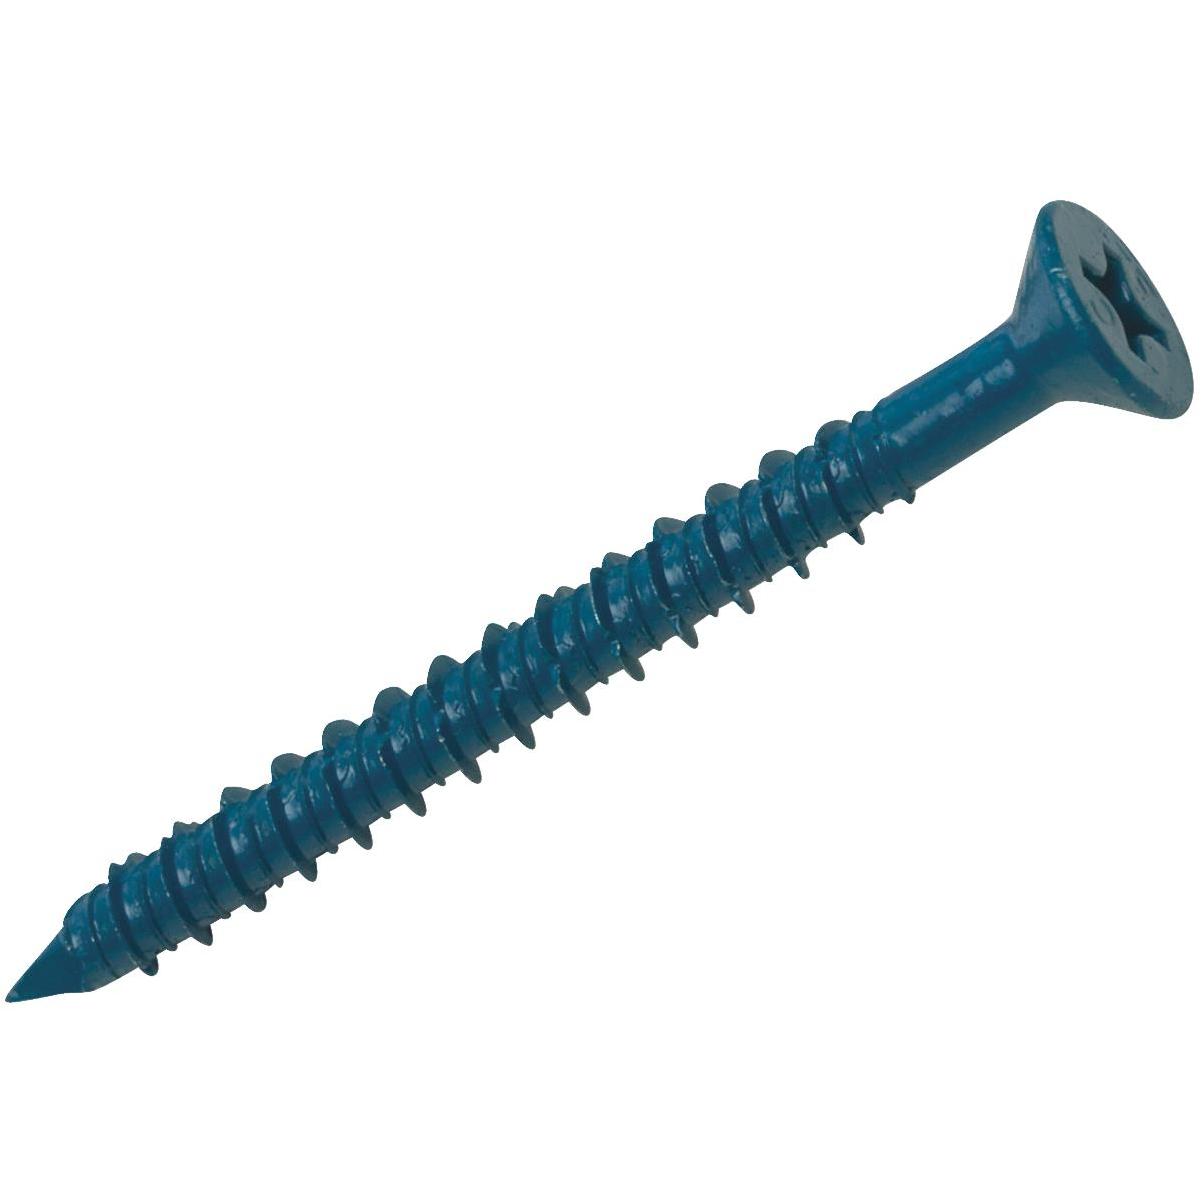 3/16 X 1-1/4 Concrete Screw Anchor Blue Flat Head For Anchoring To